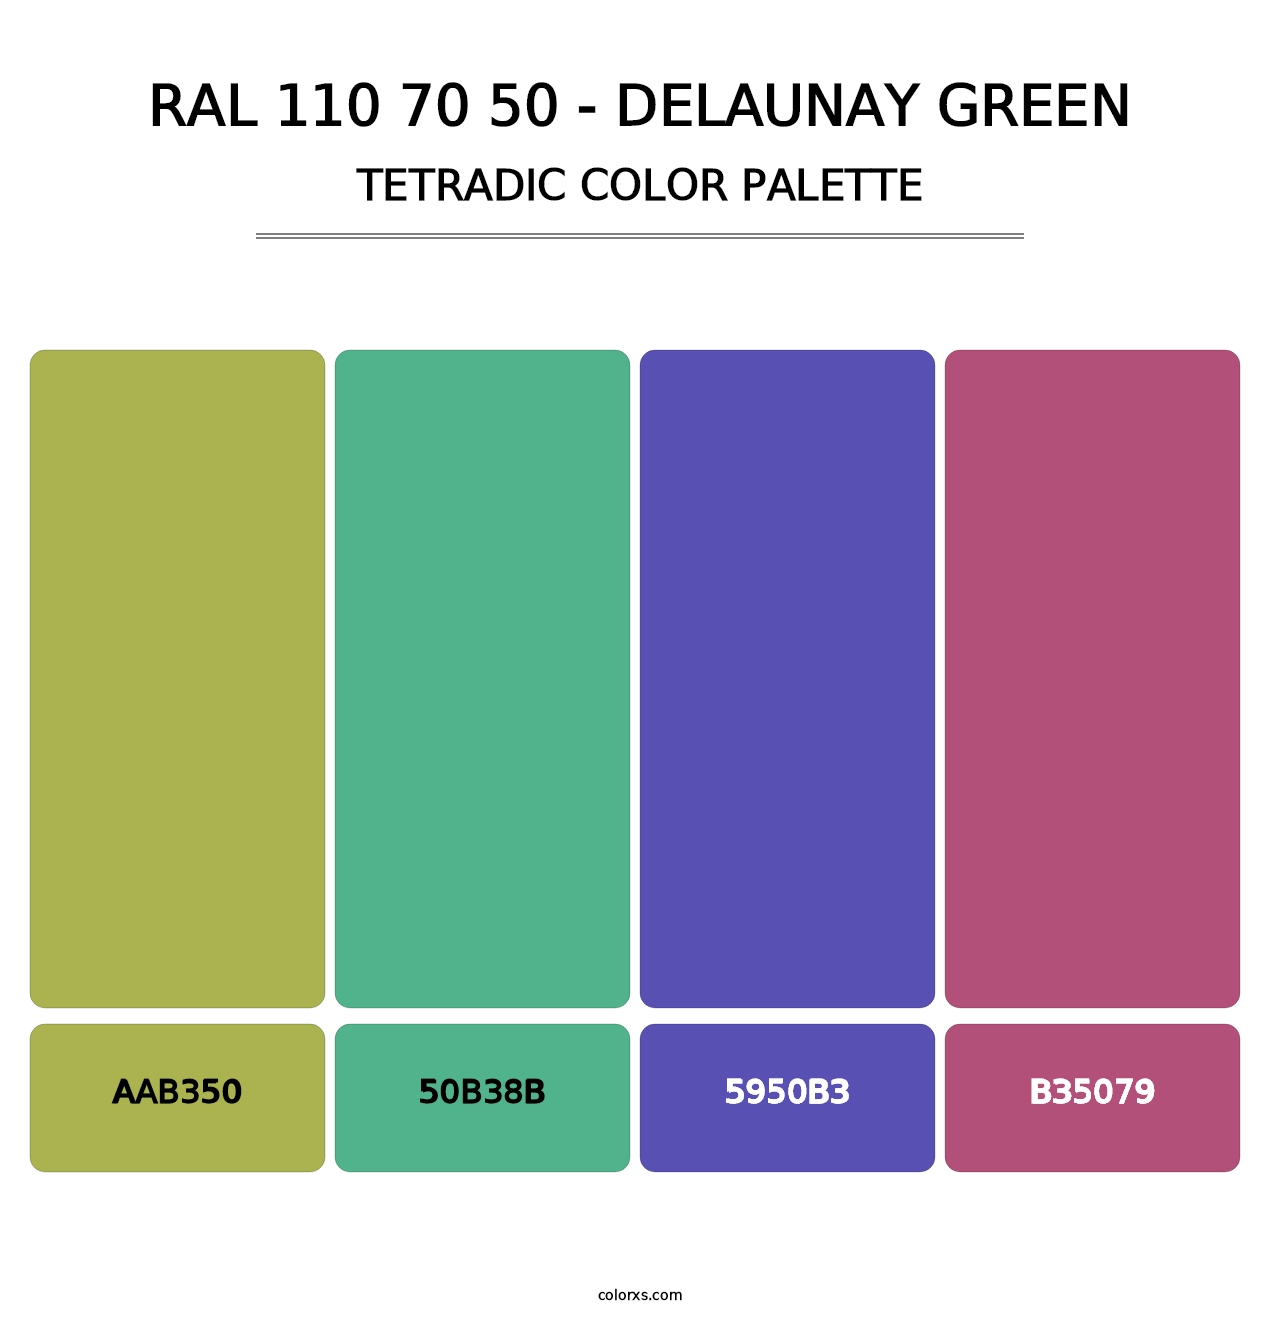 RAL 110 70 50 - Delaunay Green - Tetradic Color Palette